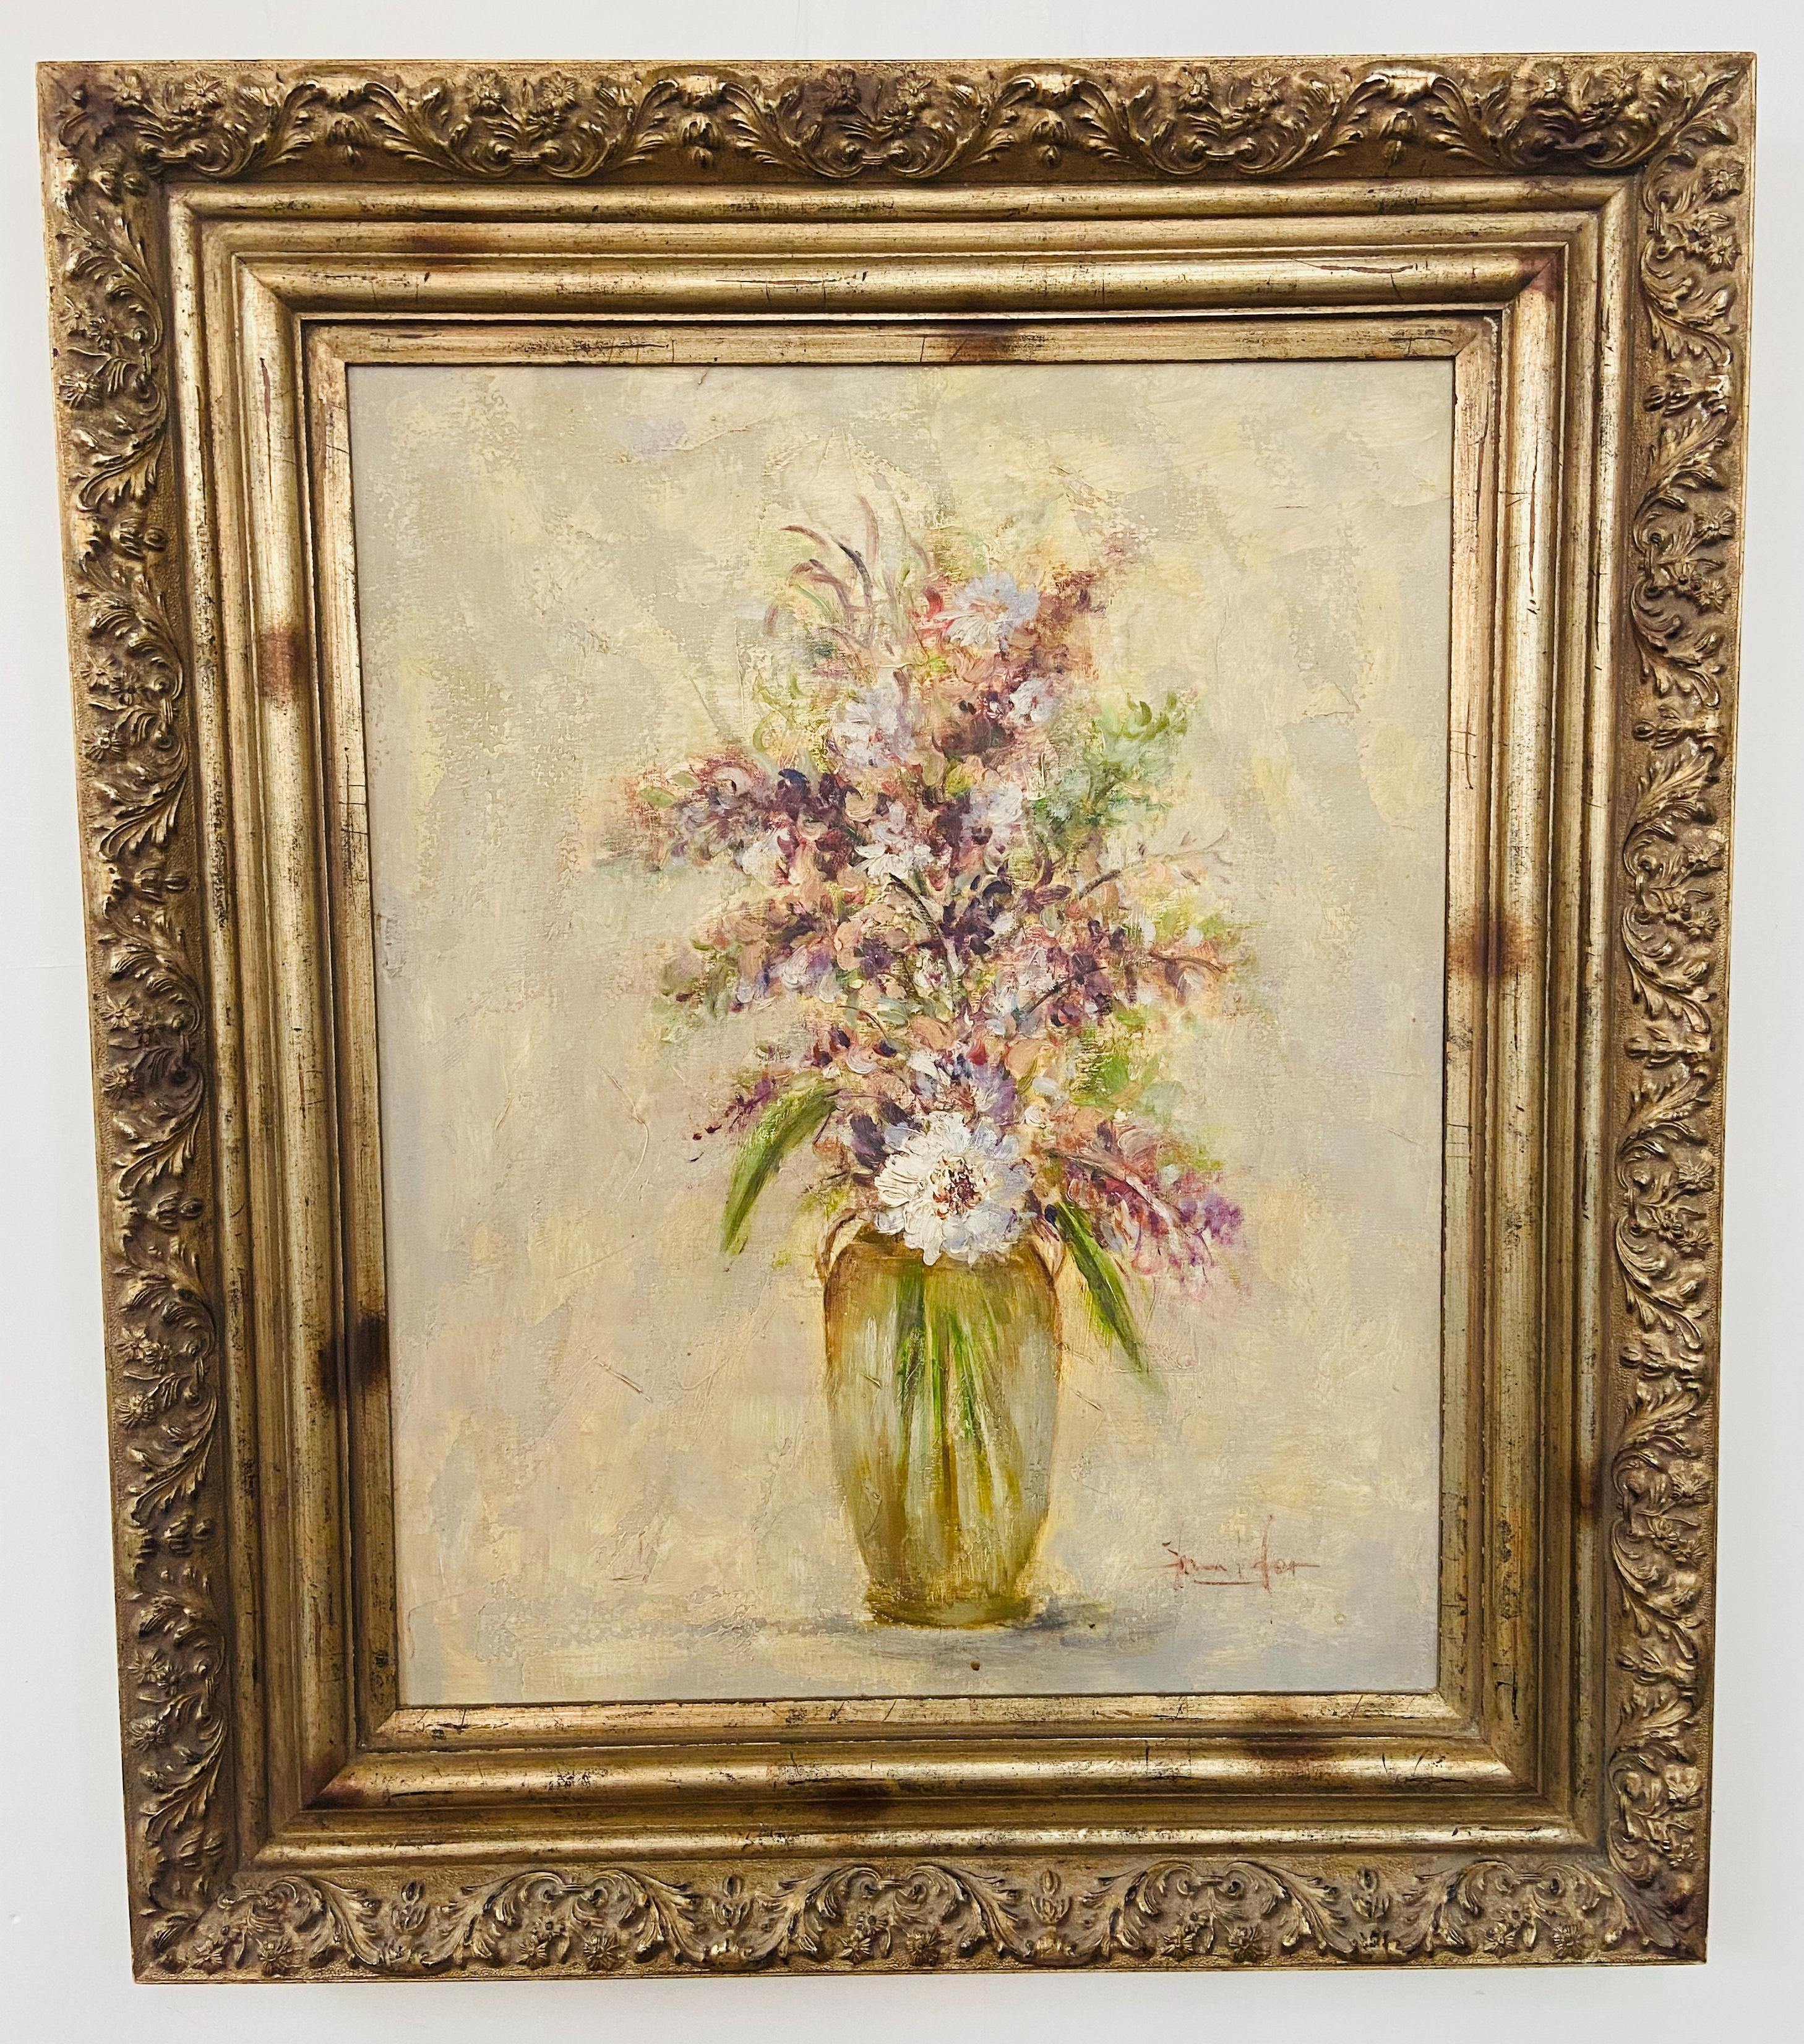 A gorgeous oil on canvas painting in a pastel tone depicting a vase with white flowers and lavenders in a vase. The painting is beautifully framed in a custom gilt carved wood frame and is signed by artist Jennifer. 

Dimensions: 40.5